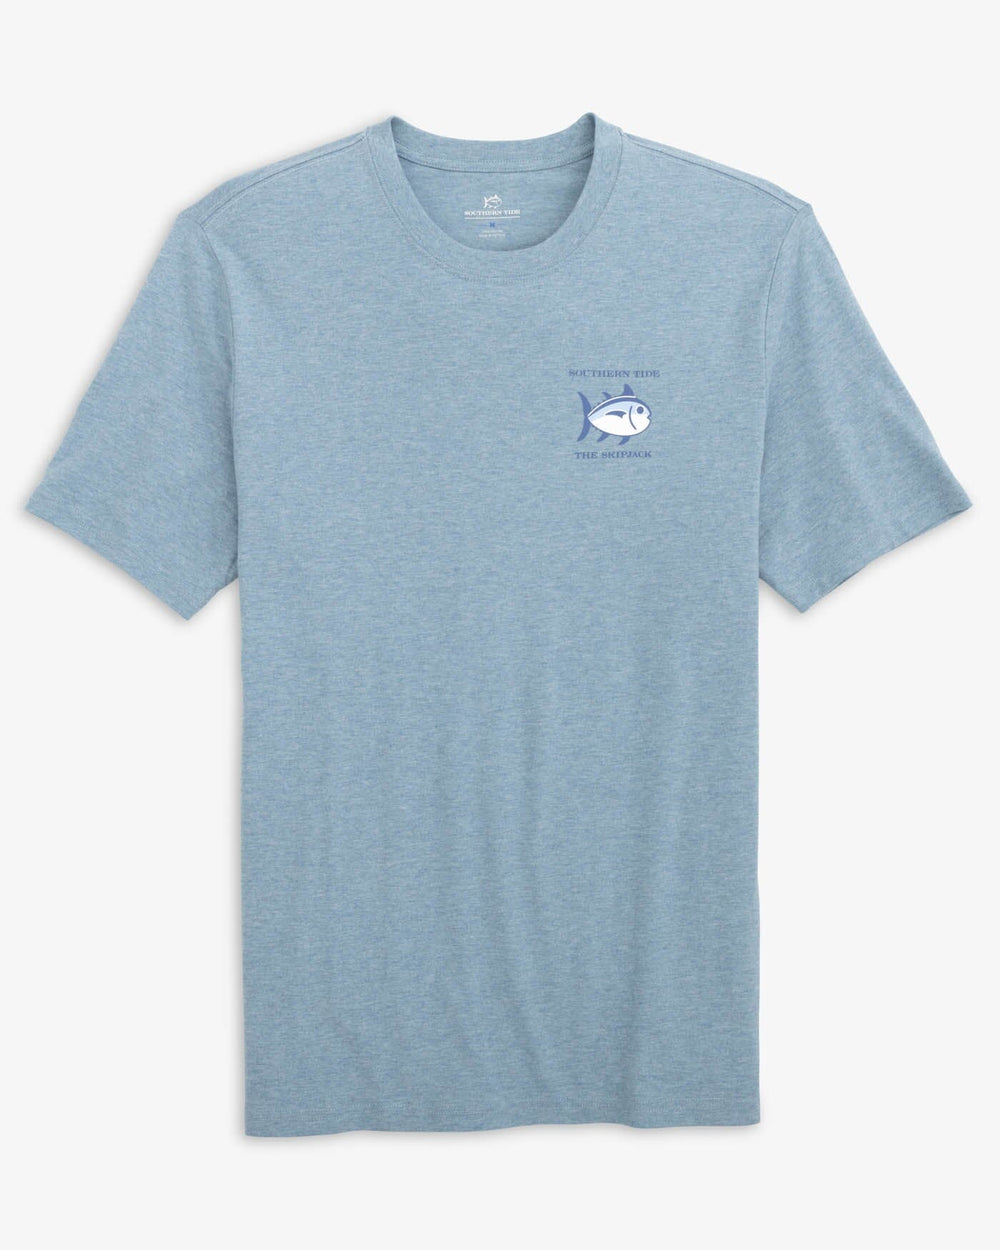 The front view of the Southern Tide Heathered Original Skipjack T-Shirt by Southern Tide - Heather Blue Shadow